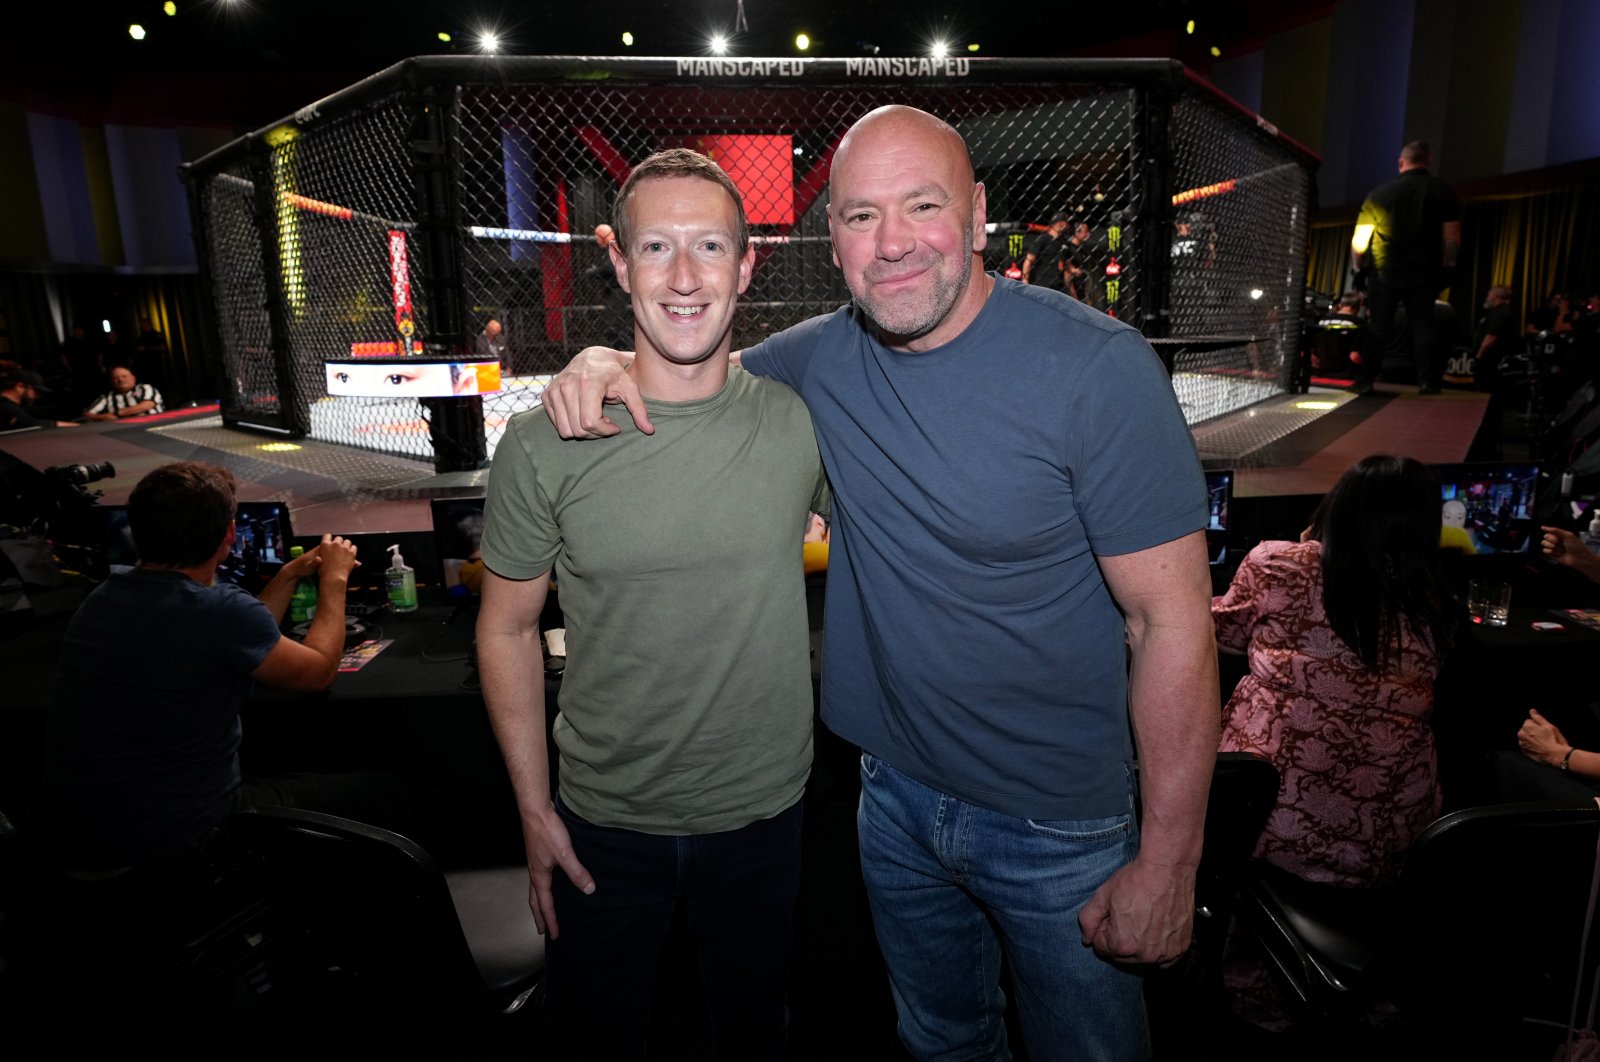 Mark Zuckerberg, founder and CEO of Facebook/Meta, poses with UFC President Dana White during a UFC Fight Night event at UFC APEX, Las Vegas, Nevada, U.S., Oct. 1, 2022. (Getty Images Photo)